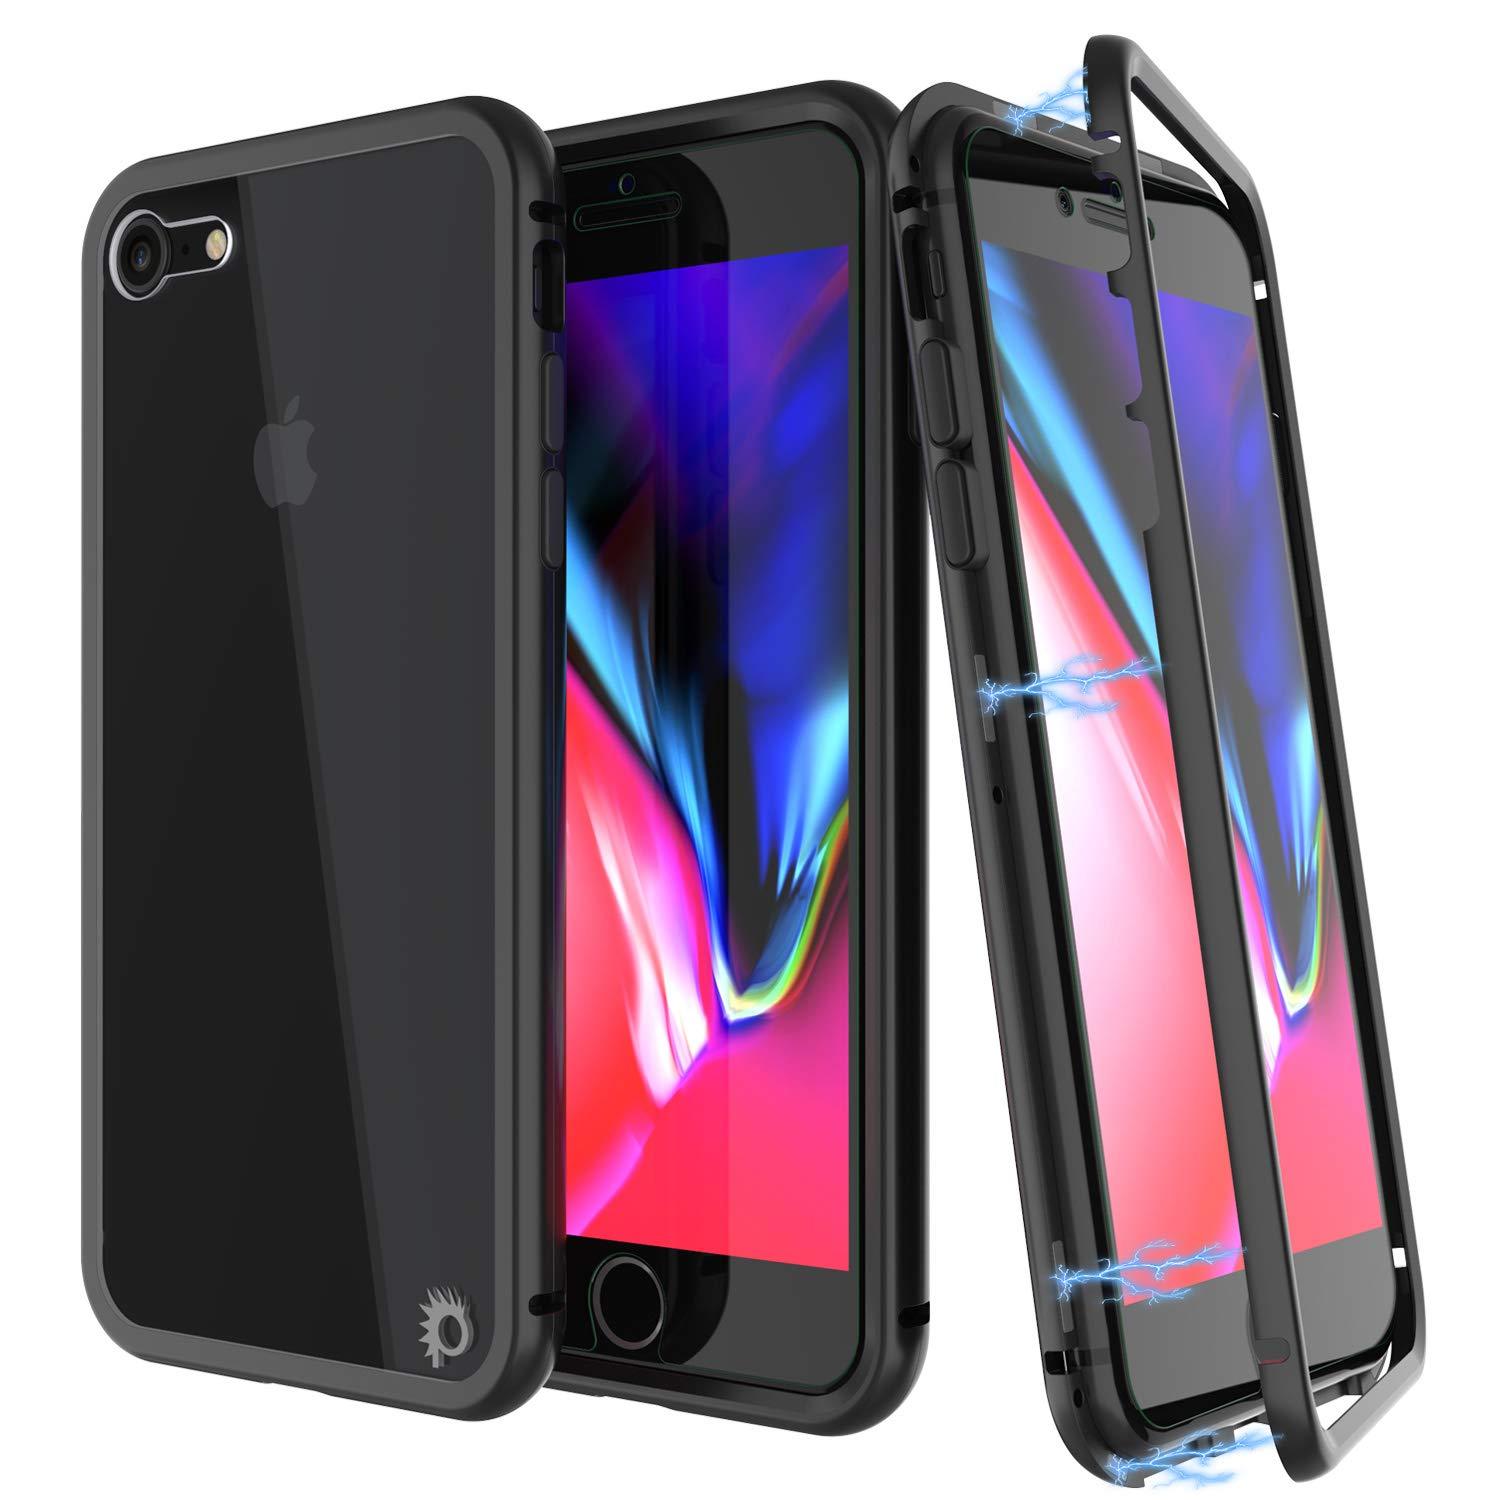 iPhone 8 Case, Punkcase Magnetix 2.0 Protective TPU Cover W/ Tempered Glass Screen Protector [Black]